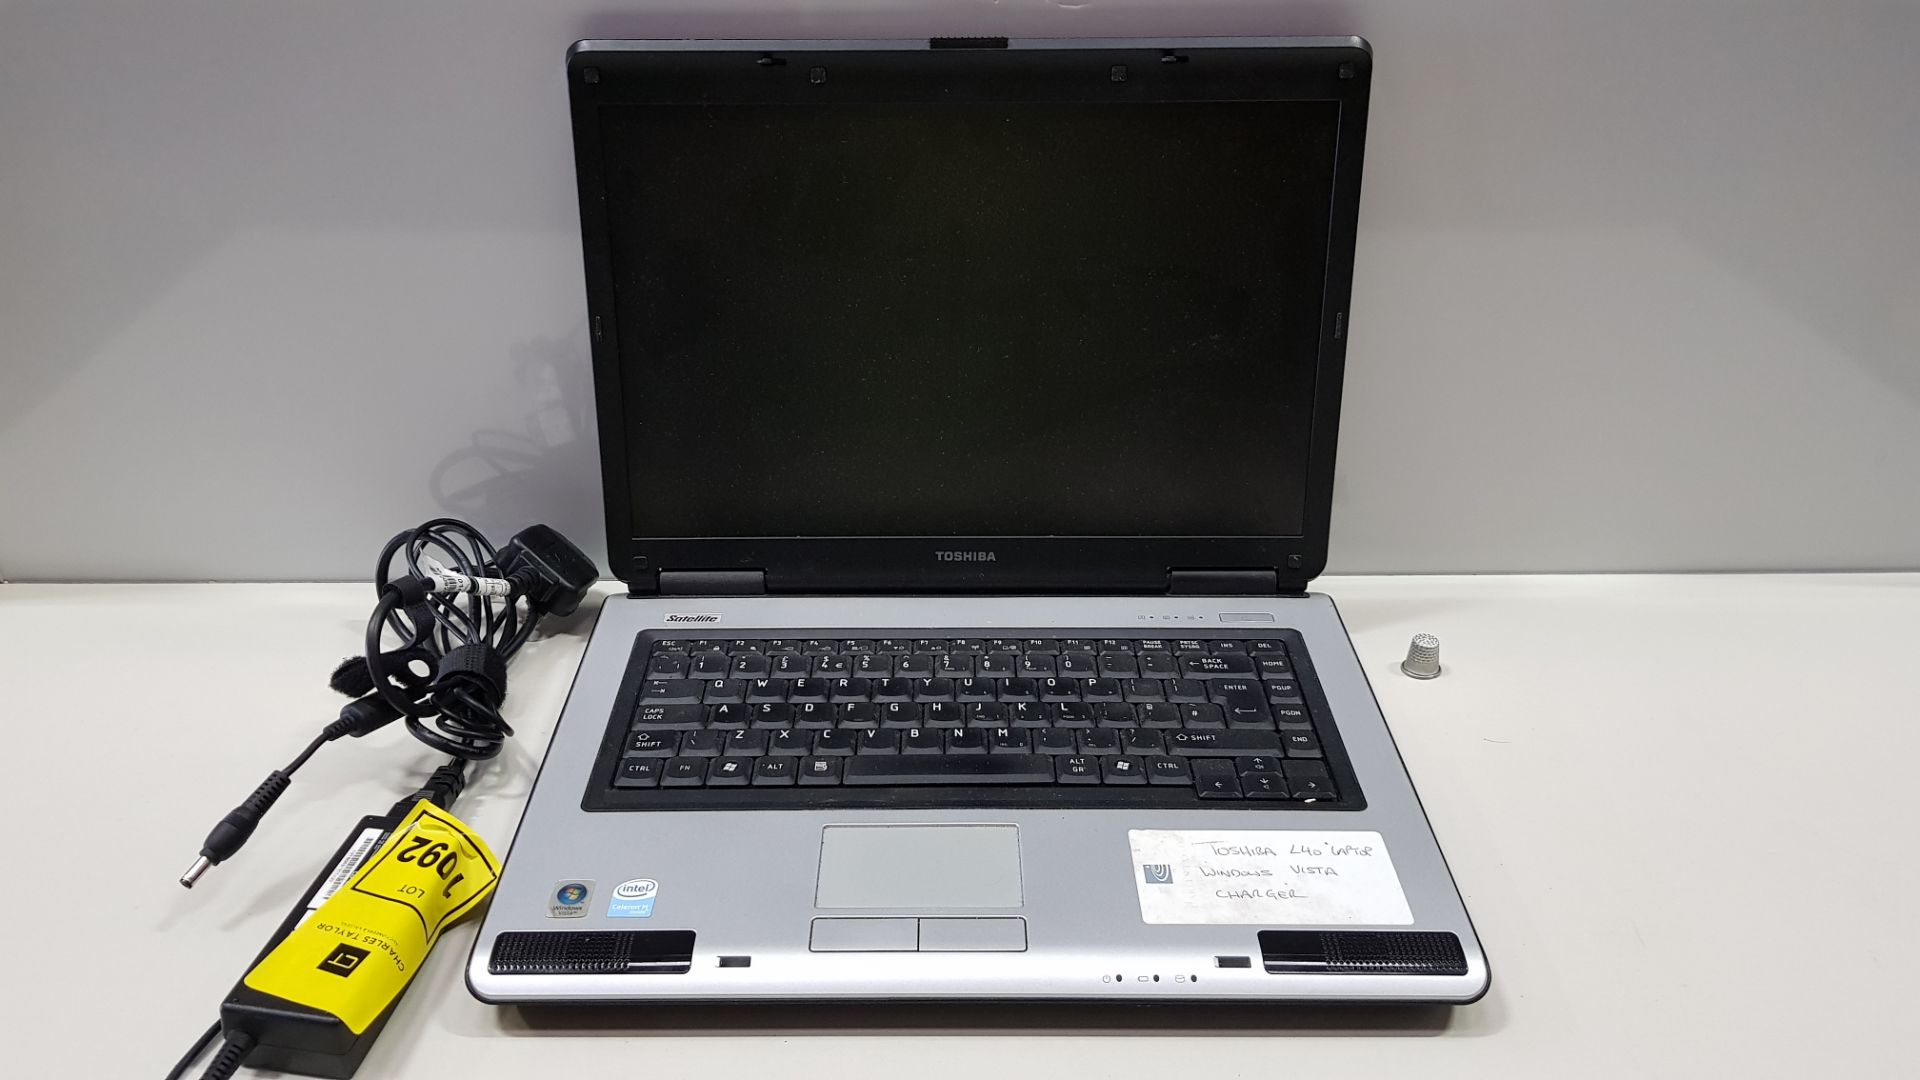 TOSHIBA L40 LAPTOP WINDOWS VISTA - WITH CHARGER